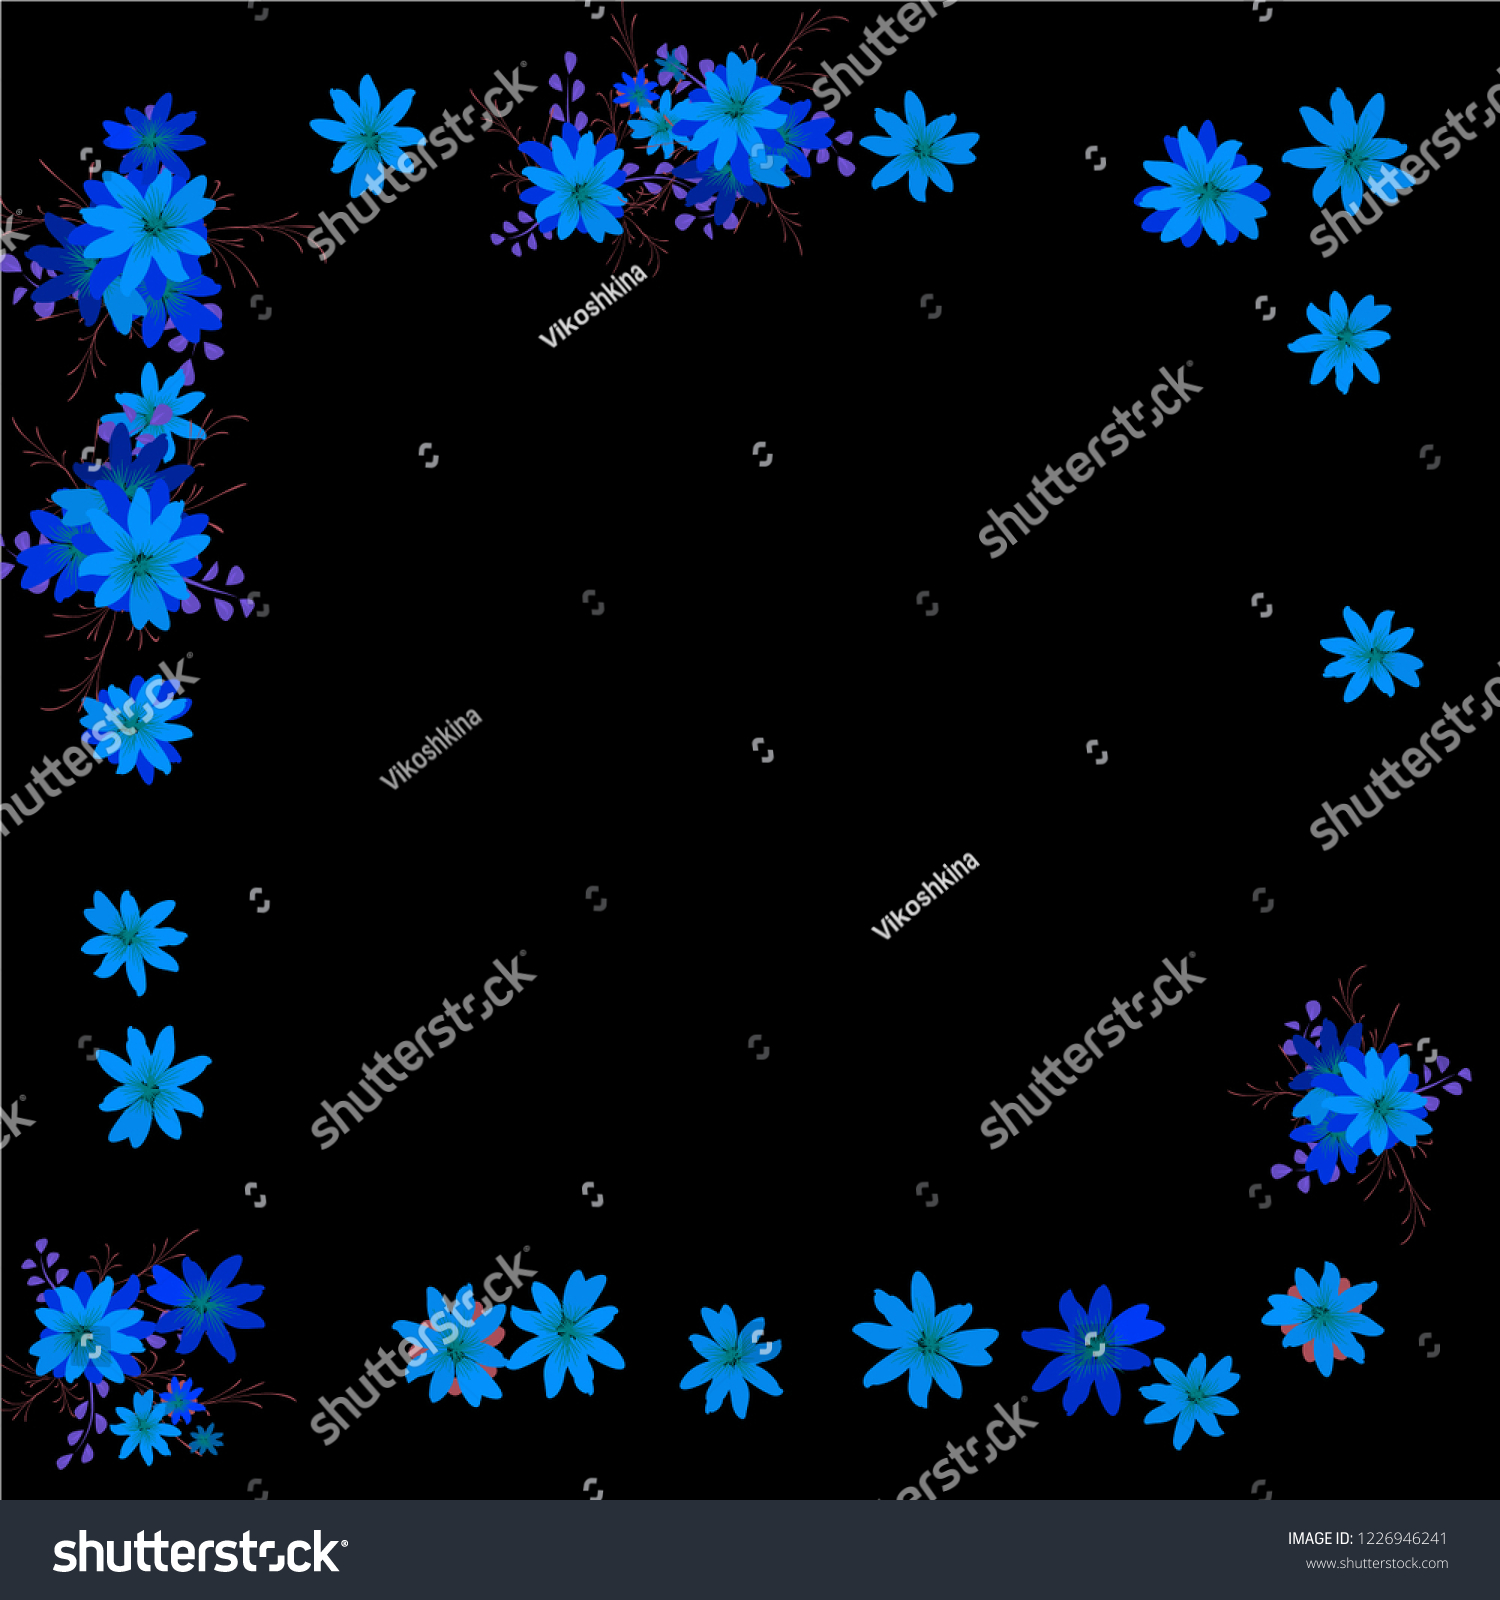 Floral Wreath. Vector Square Pattern with Tiny Wild Flowers for Print, Cover, Poster. Floral Decoration for Wedding or Birthday Invitation. Trendy Design on Black Background. #1226946241